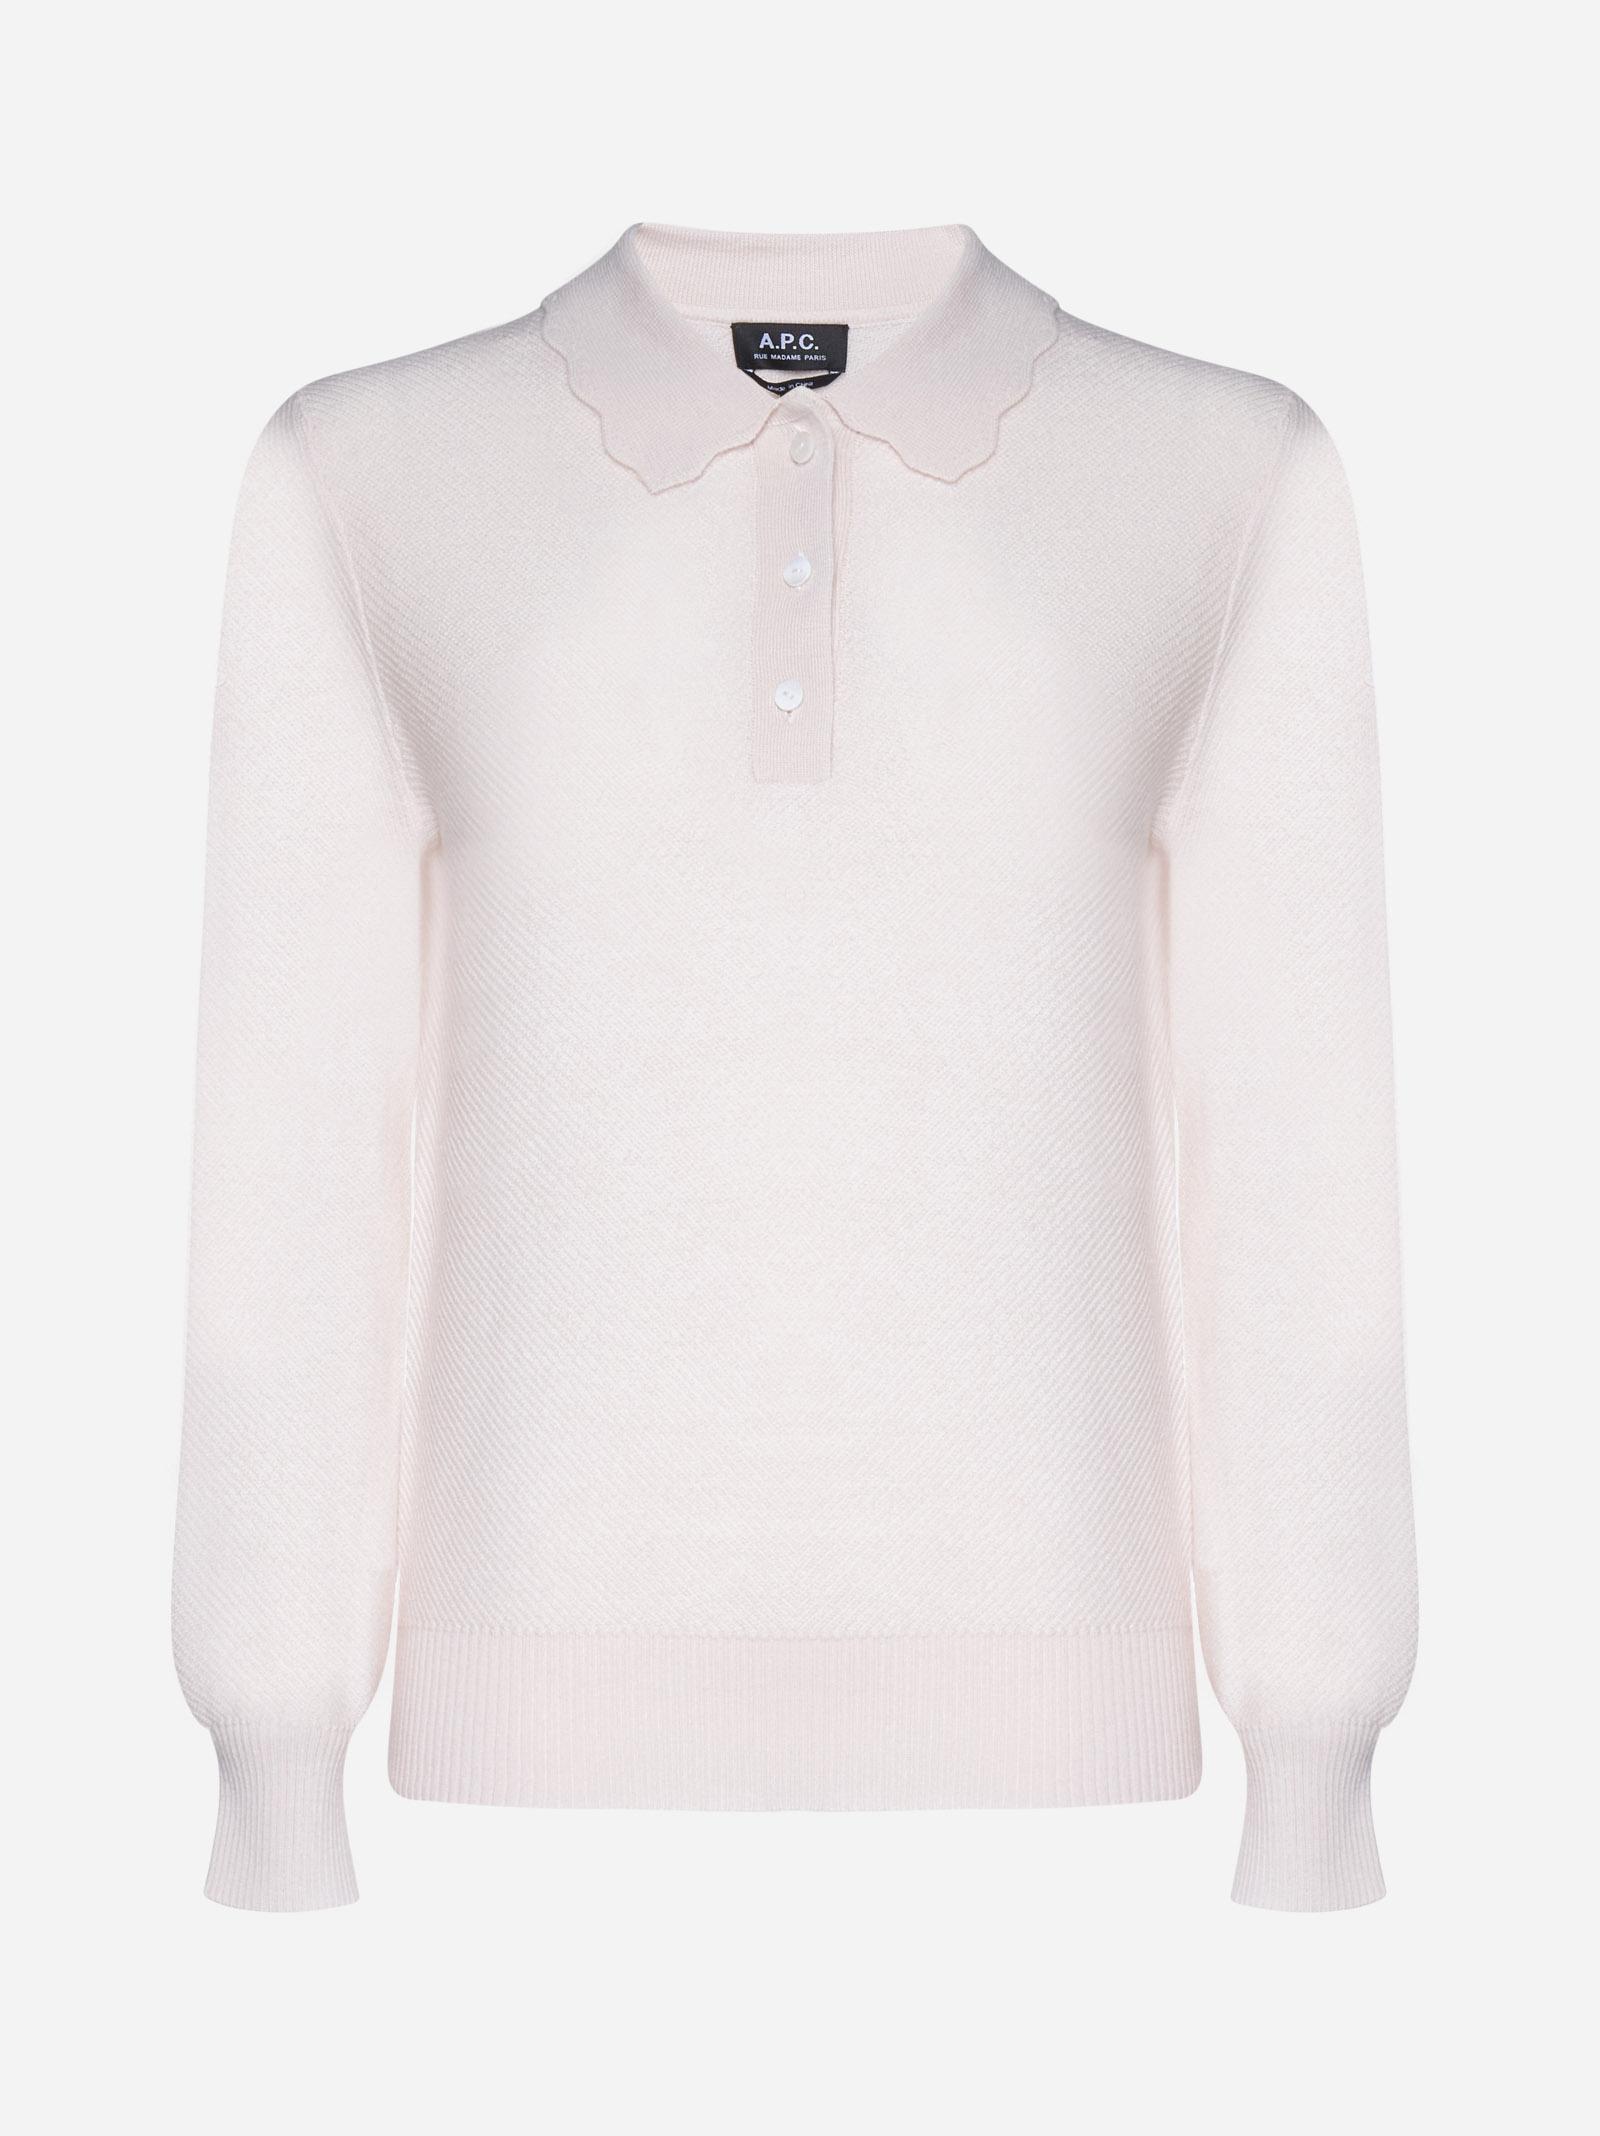 A.P.C. Olivia Merino Wool Polo Shirt in Light Pink (White) - Save 18% | Lyst